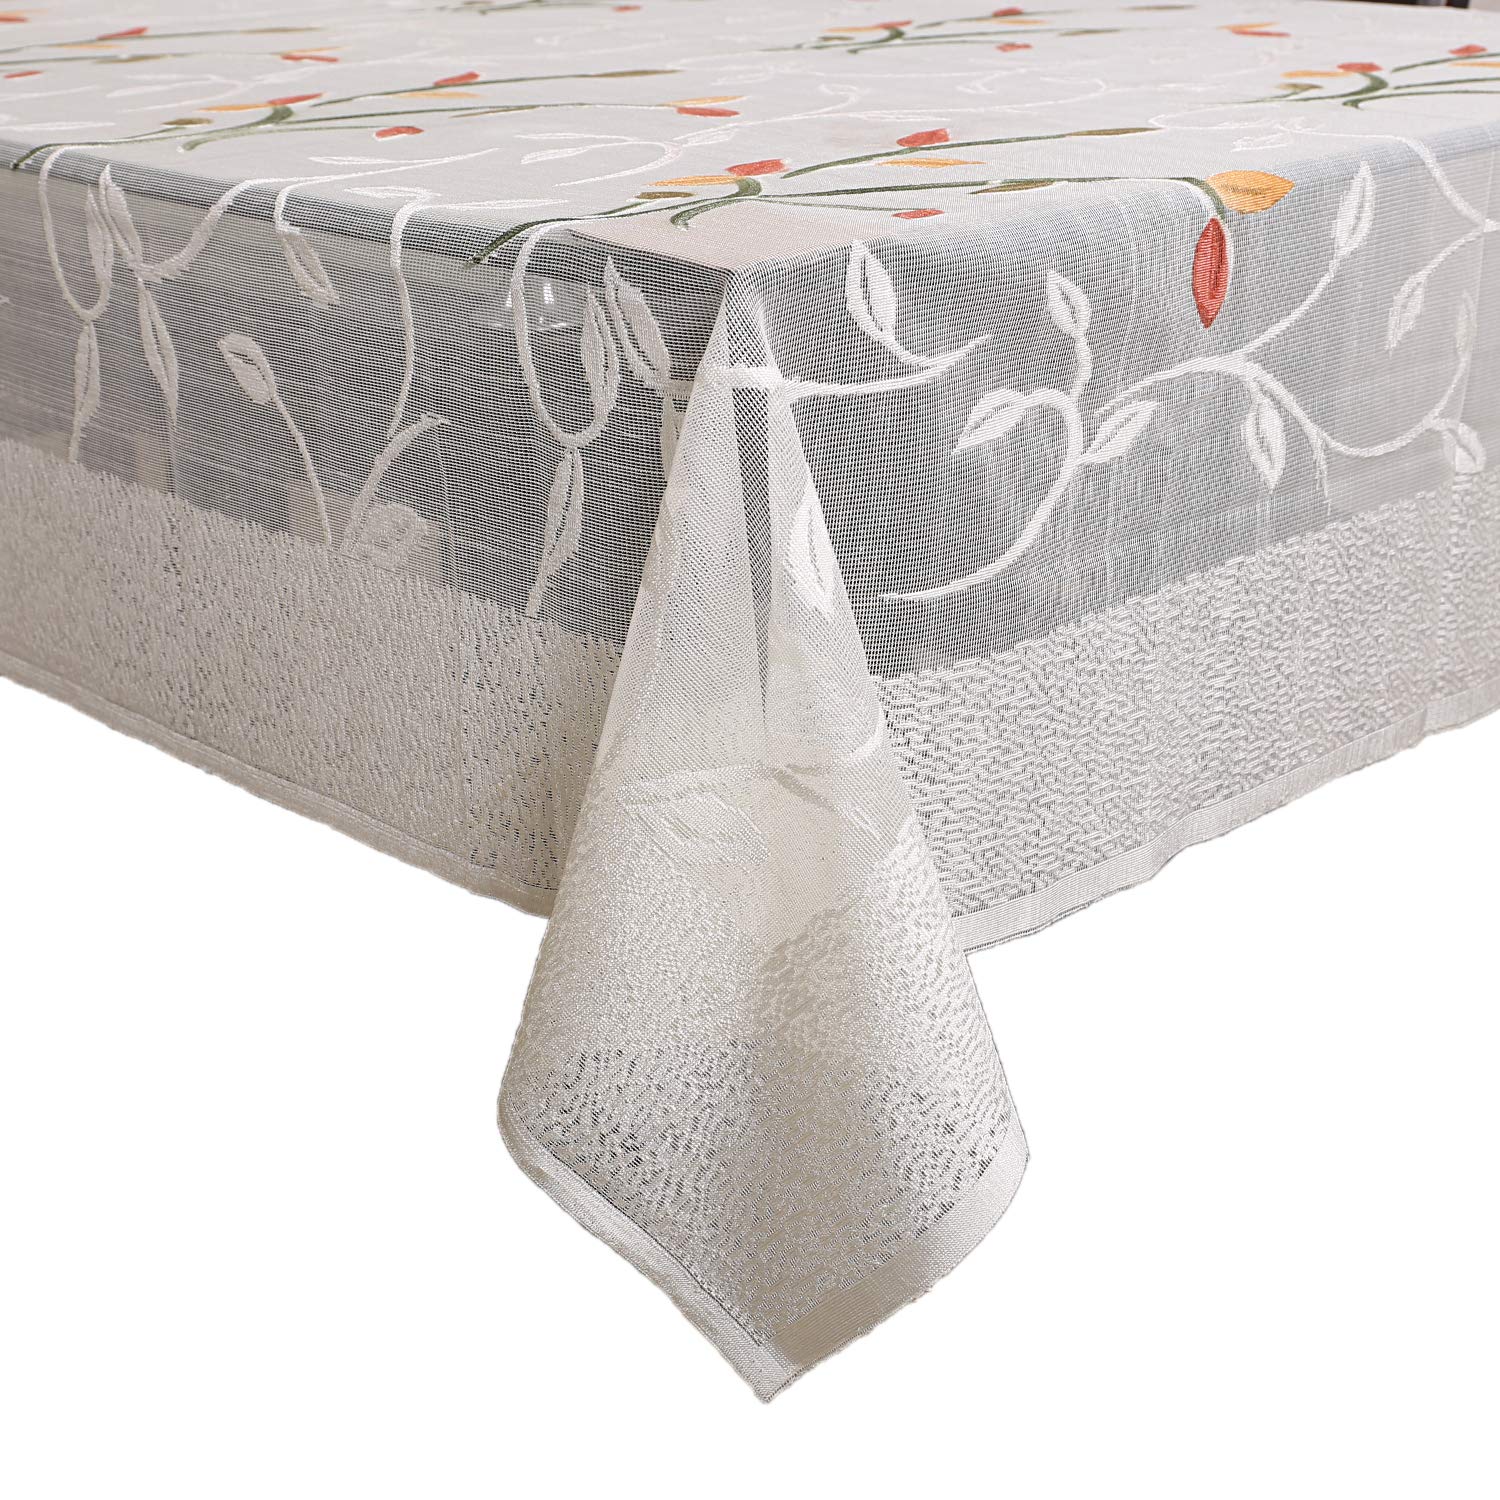 Kuber Industries Shining Leaf Design Cotton 6 Seater Dining Table Cover (Cream)